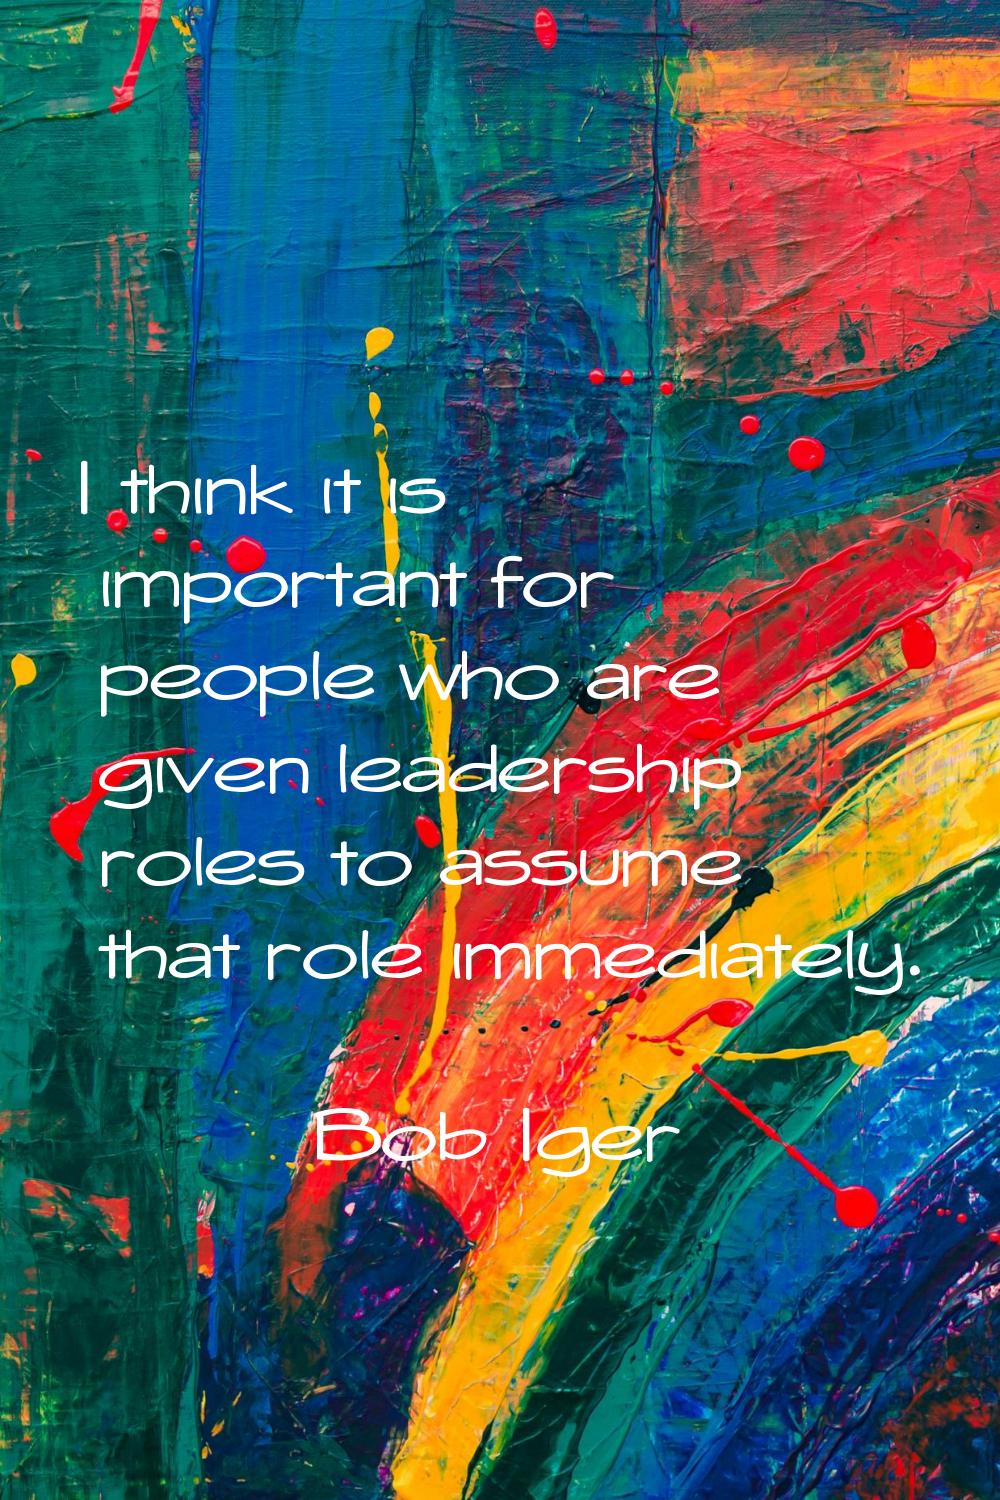 I think it is important for people who are given leadership roles to assume that role immediately.